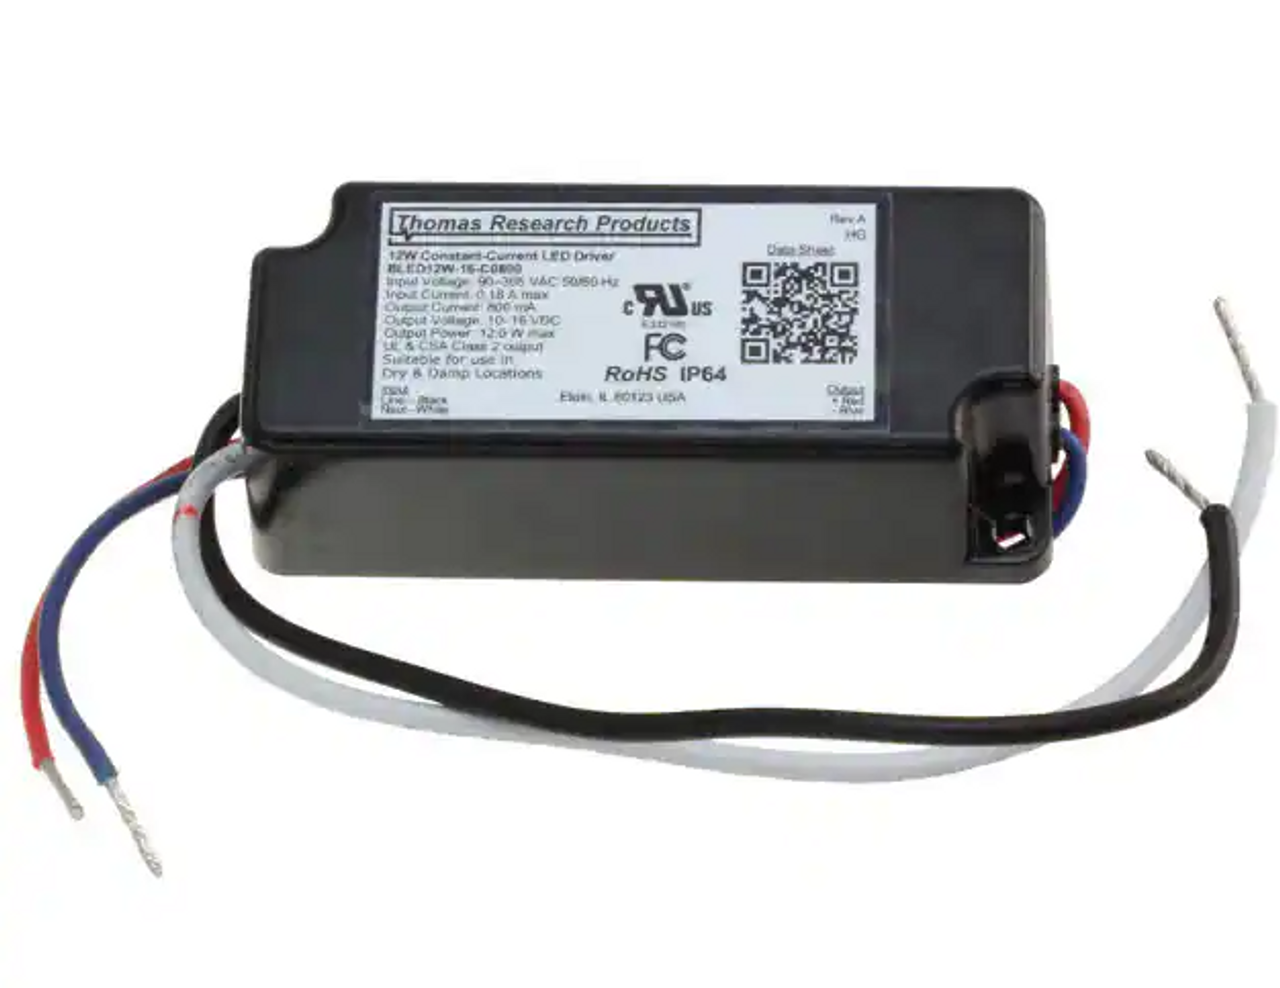 LED12W-16-C0800 Thomas Research Products LED Driver